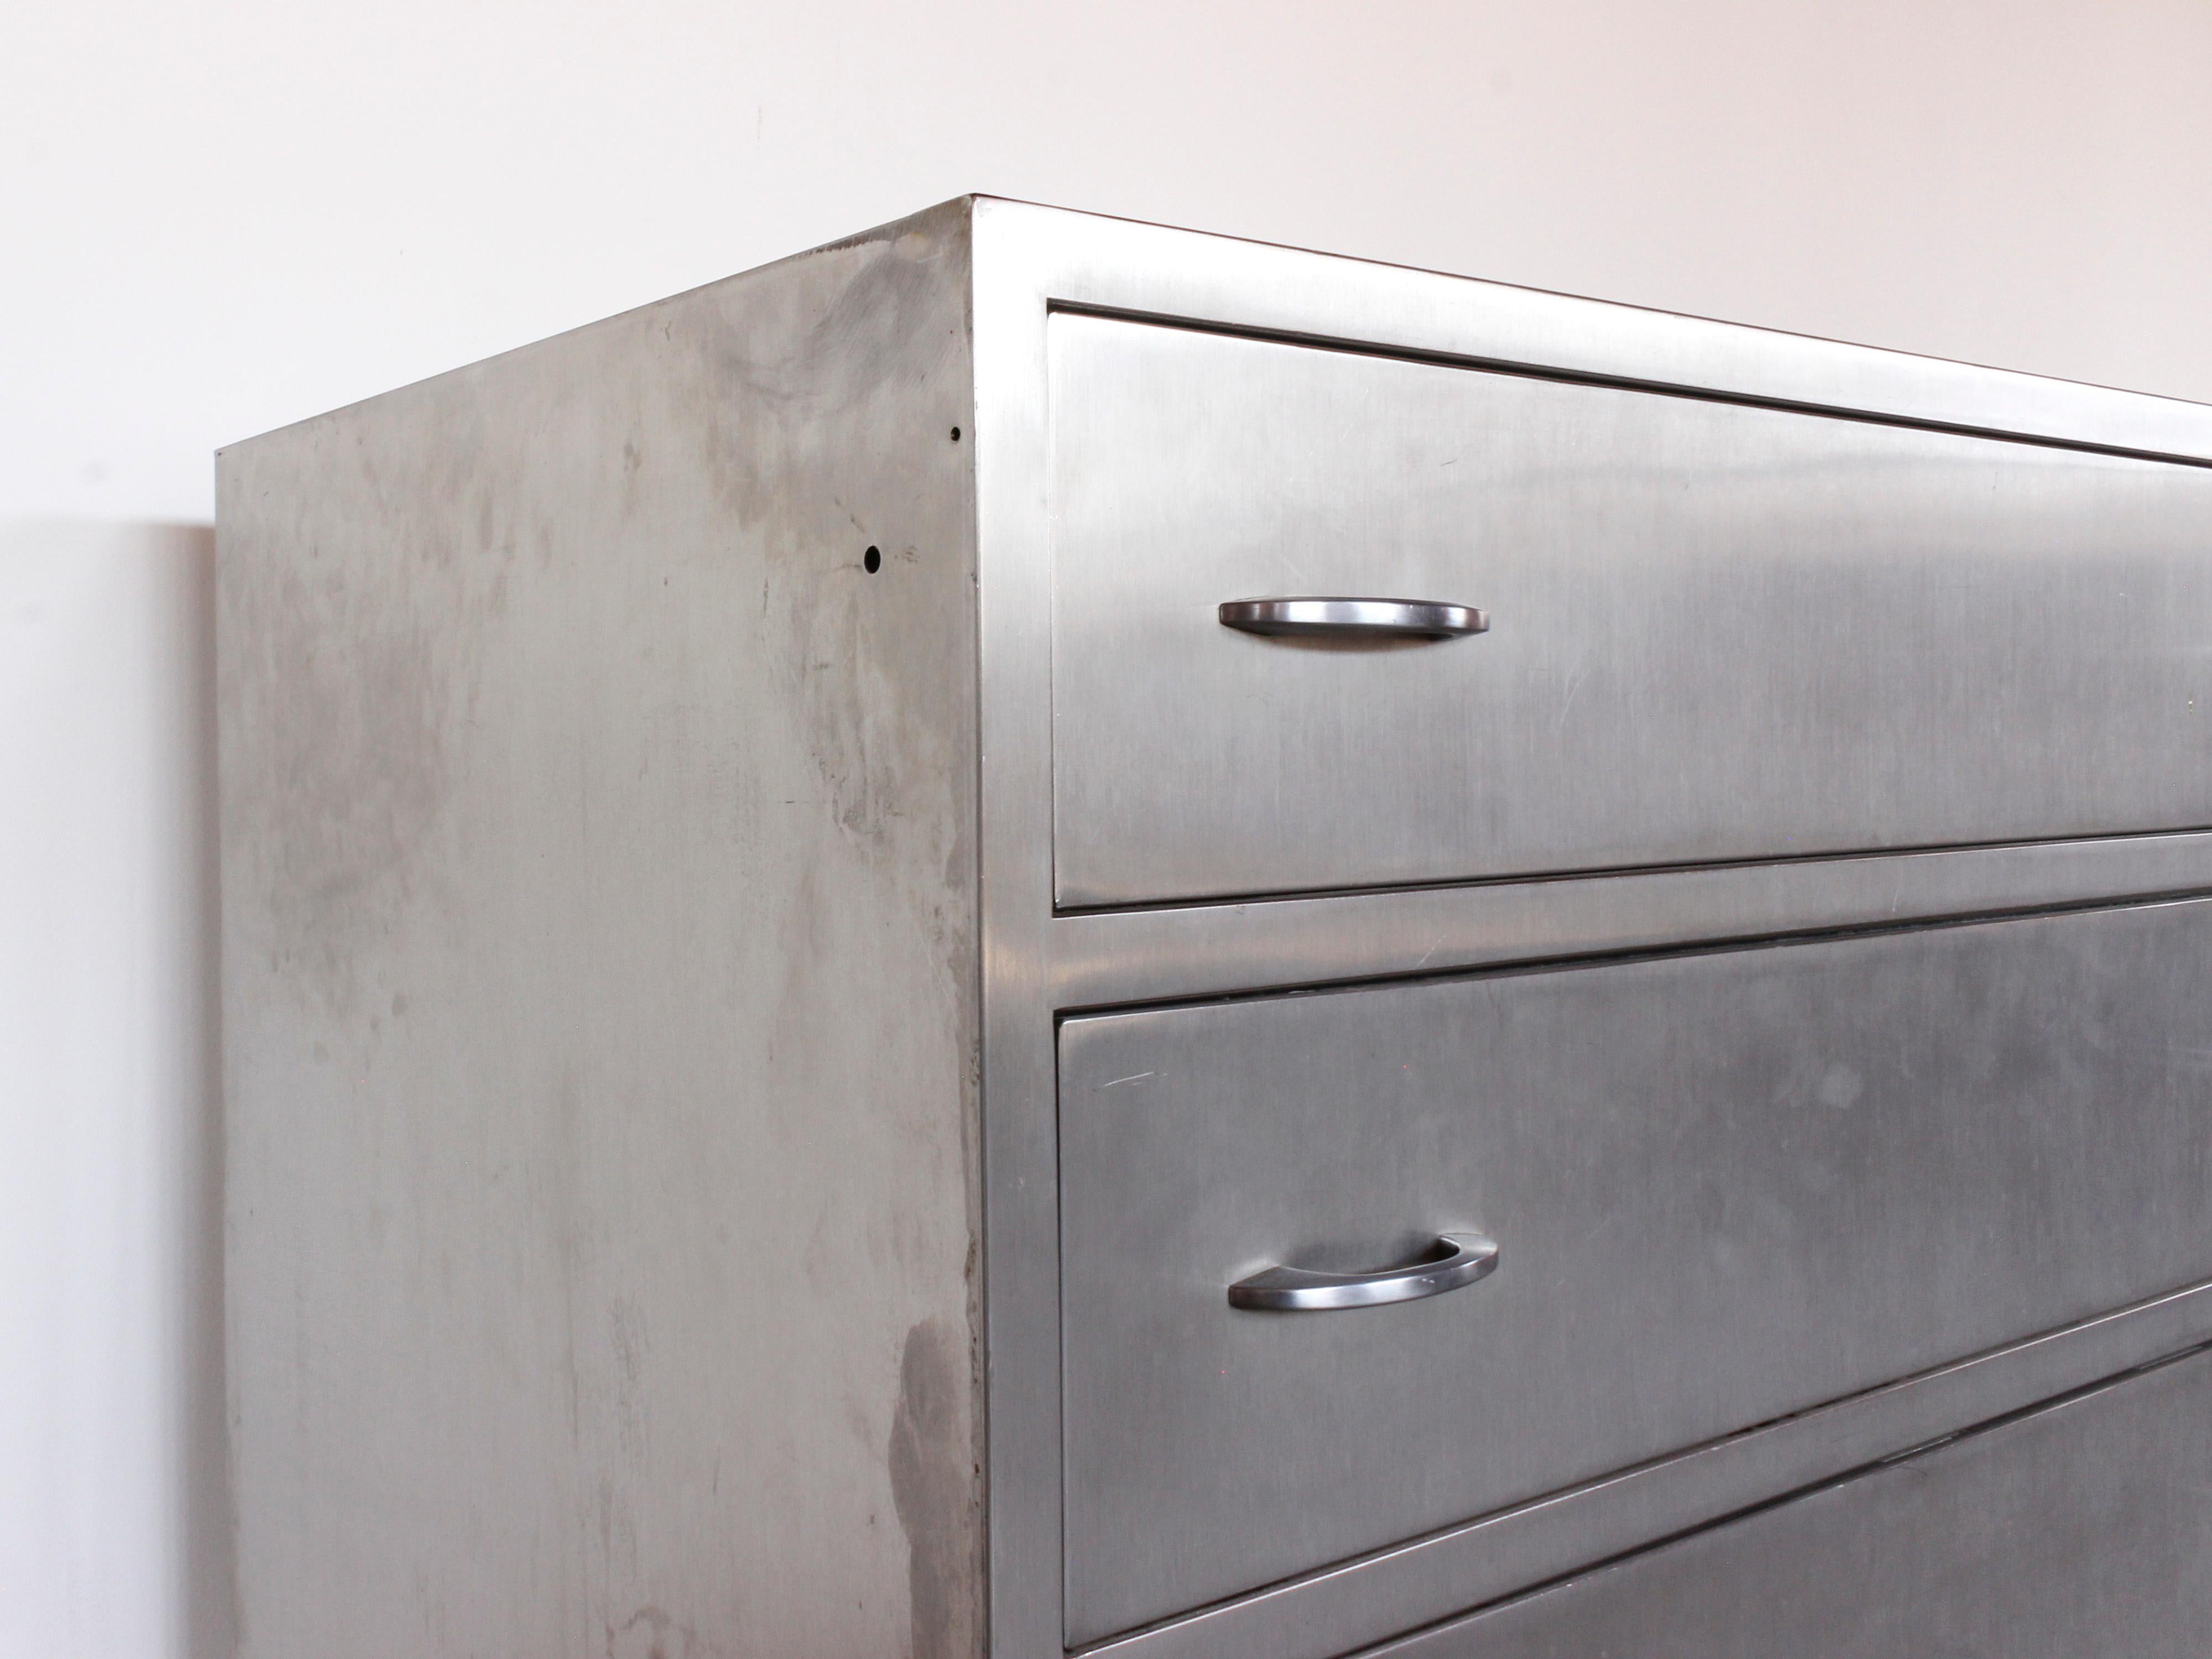 American Industrial Stainless Steel Chest With 4 Drawers, C. 1940s For Sale 9